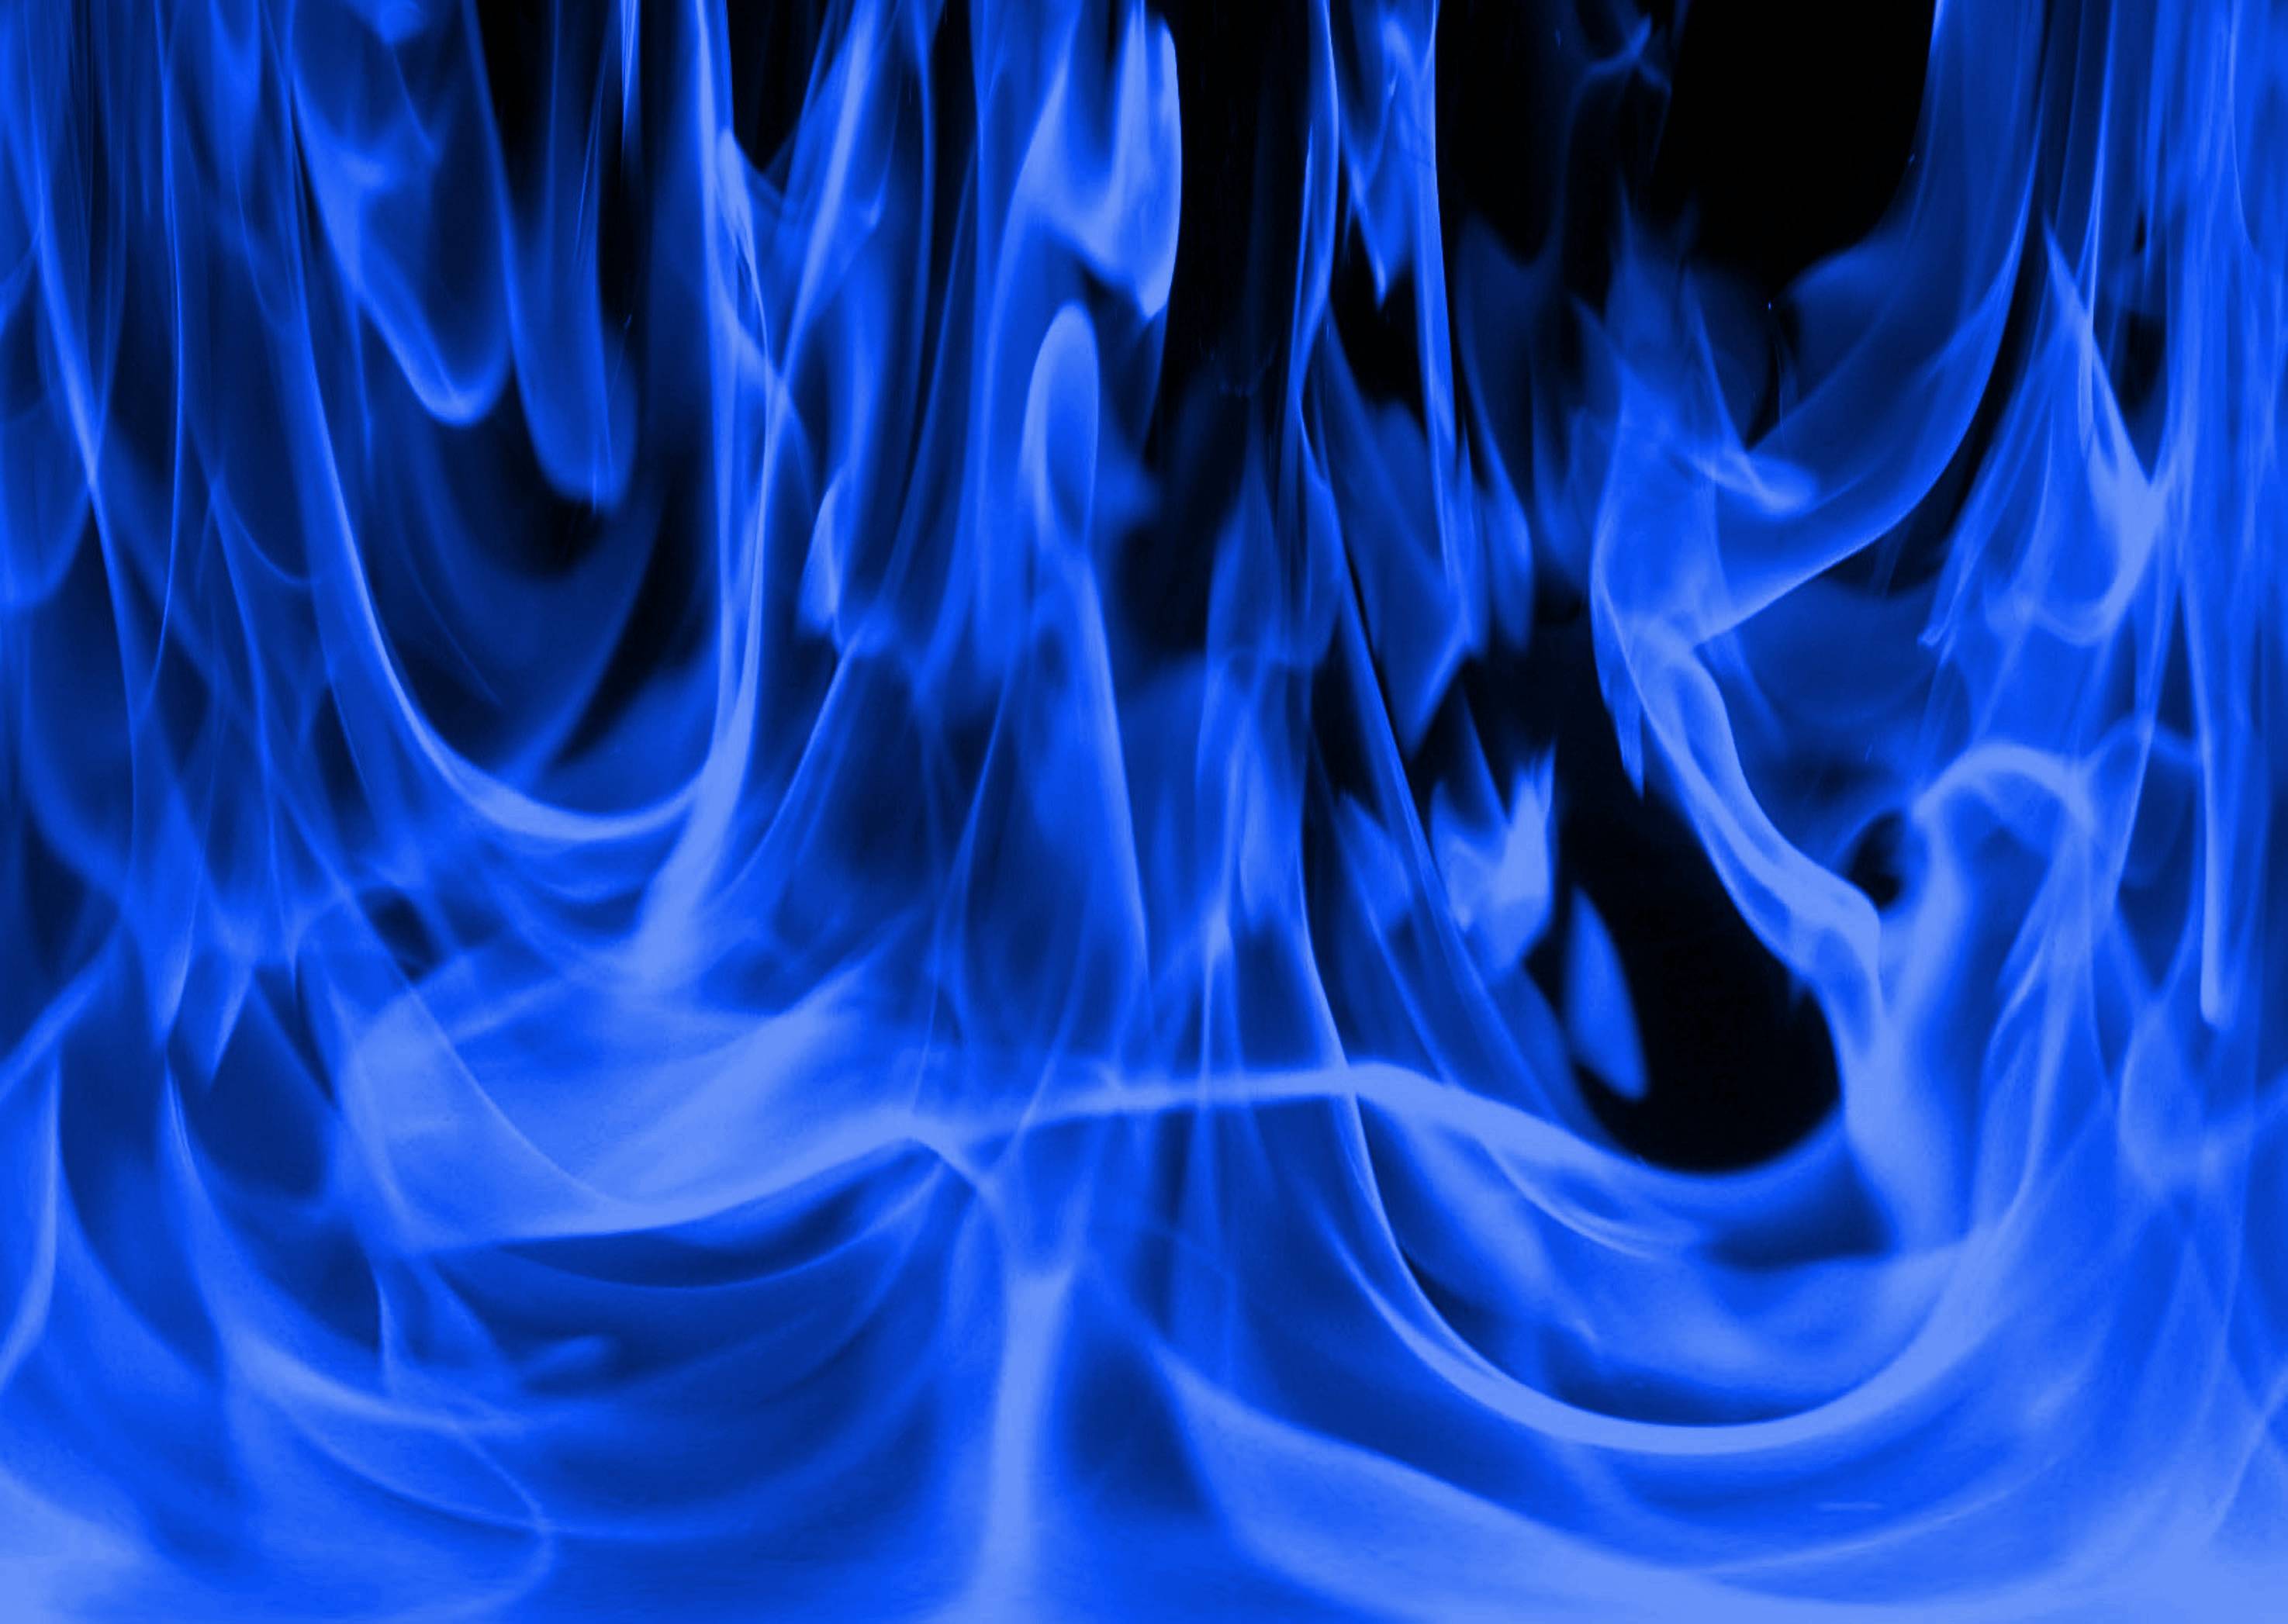 Blue Flame Wallpapers - Wallpaper Cave